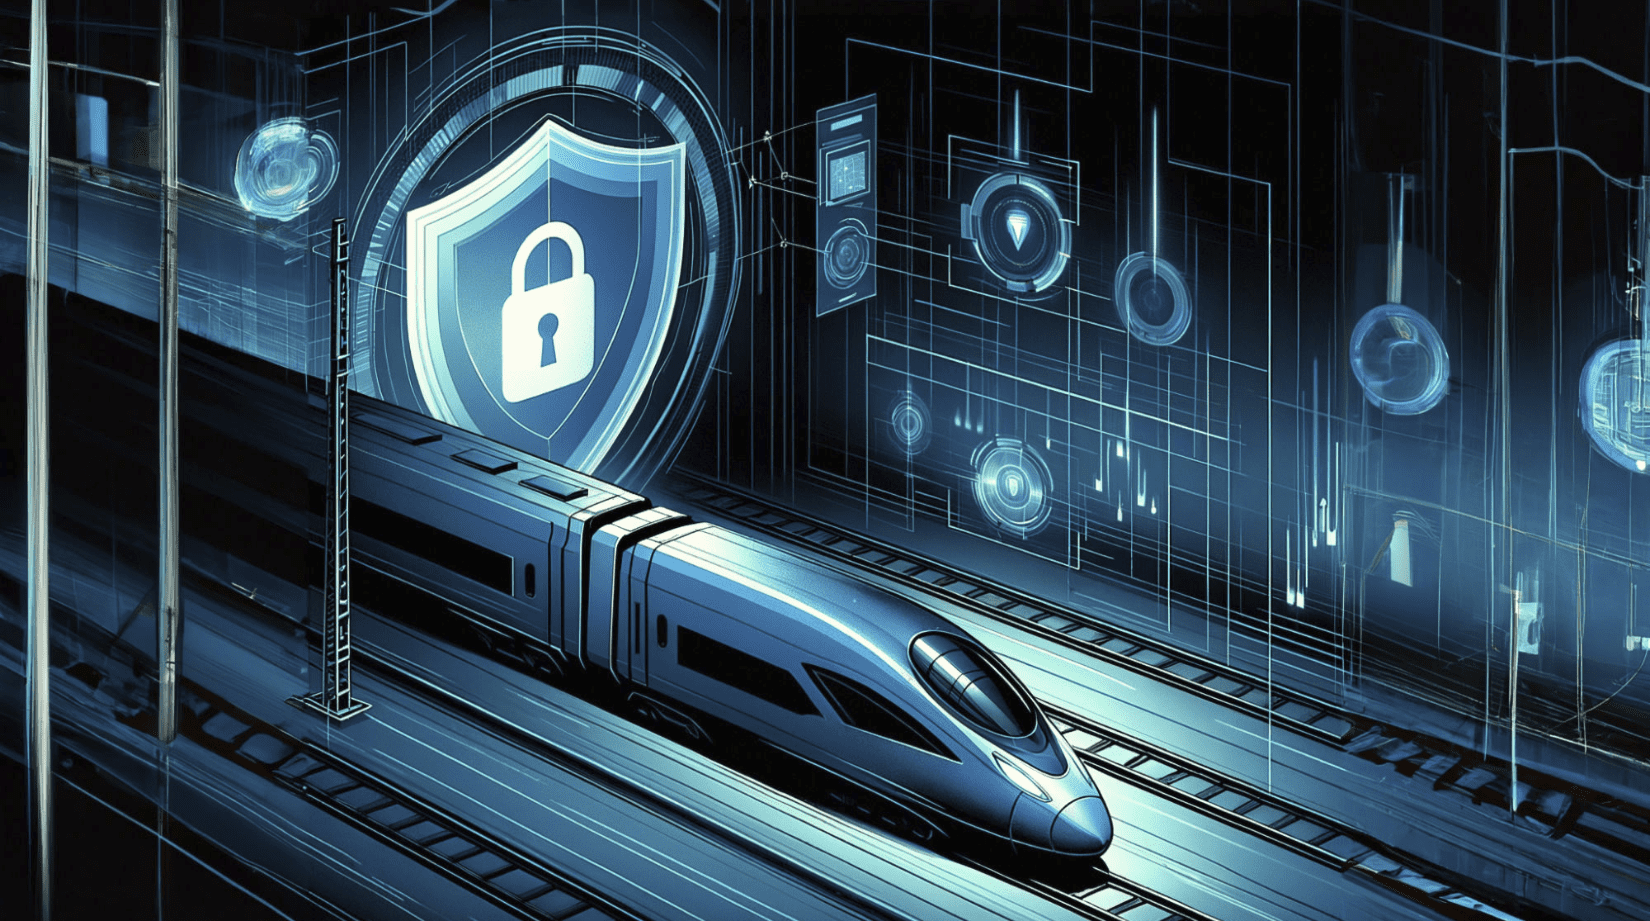 IEC 9/PT 63452: Proudly Contributing to the Next Railway Cybersecurity Standard